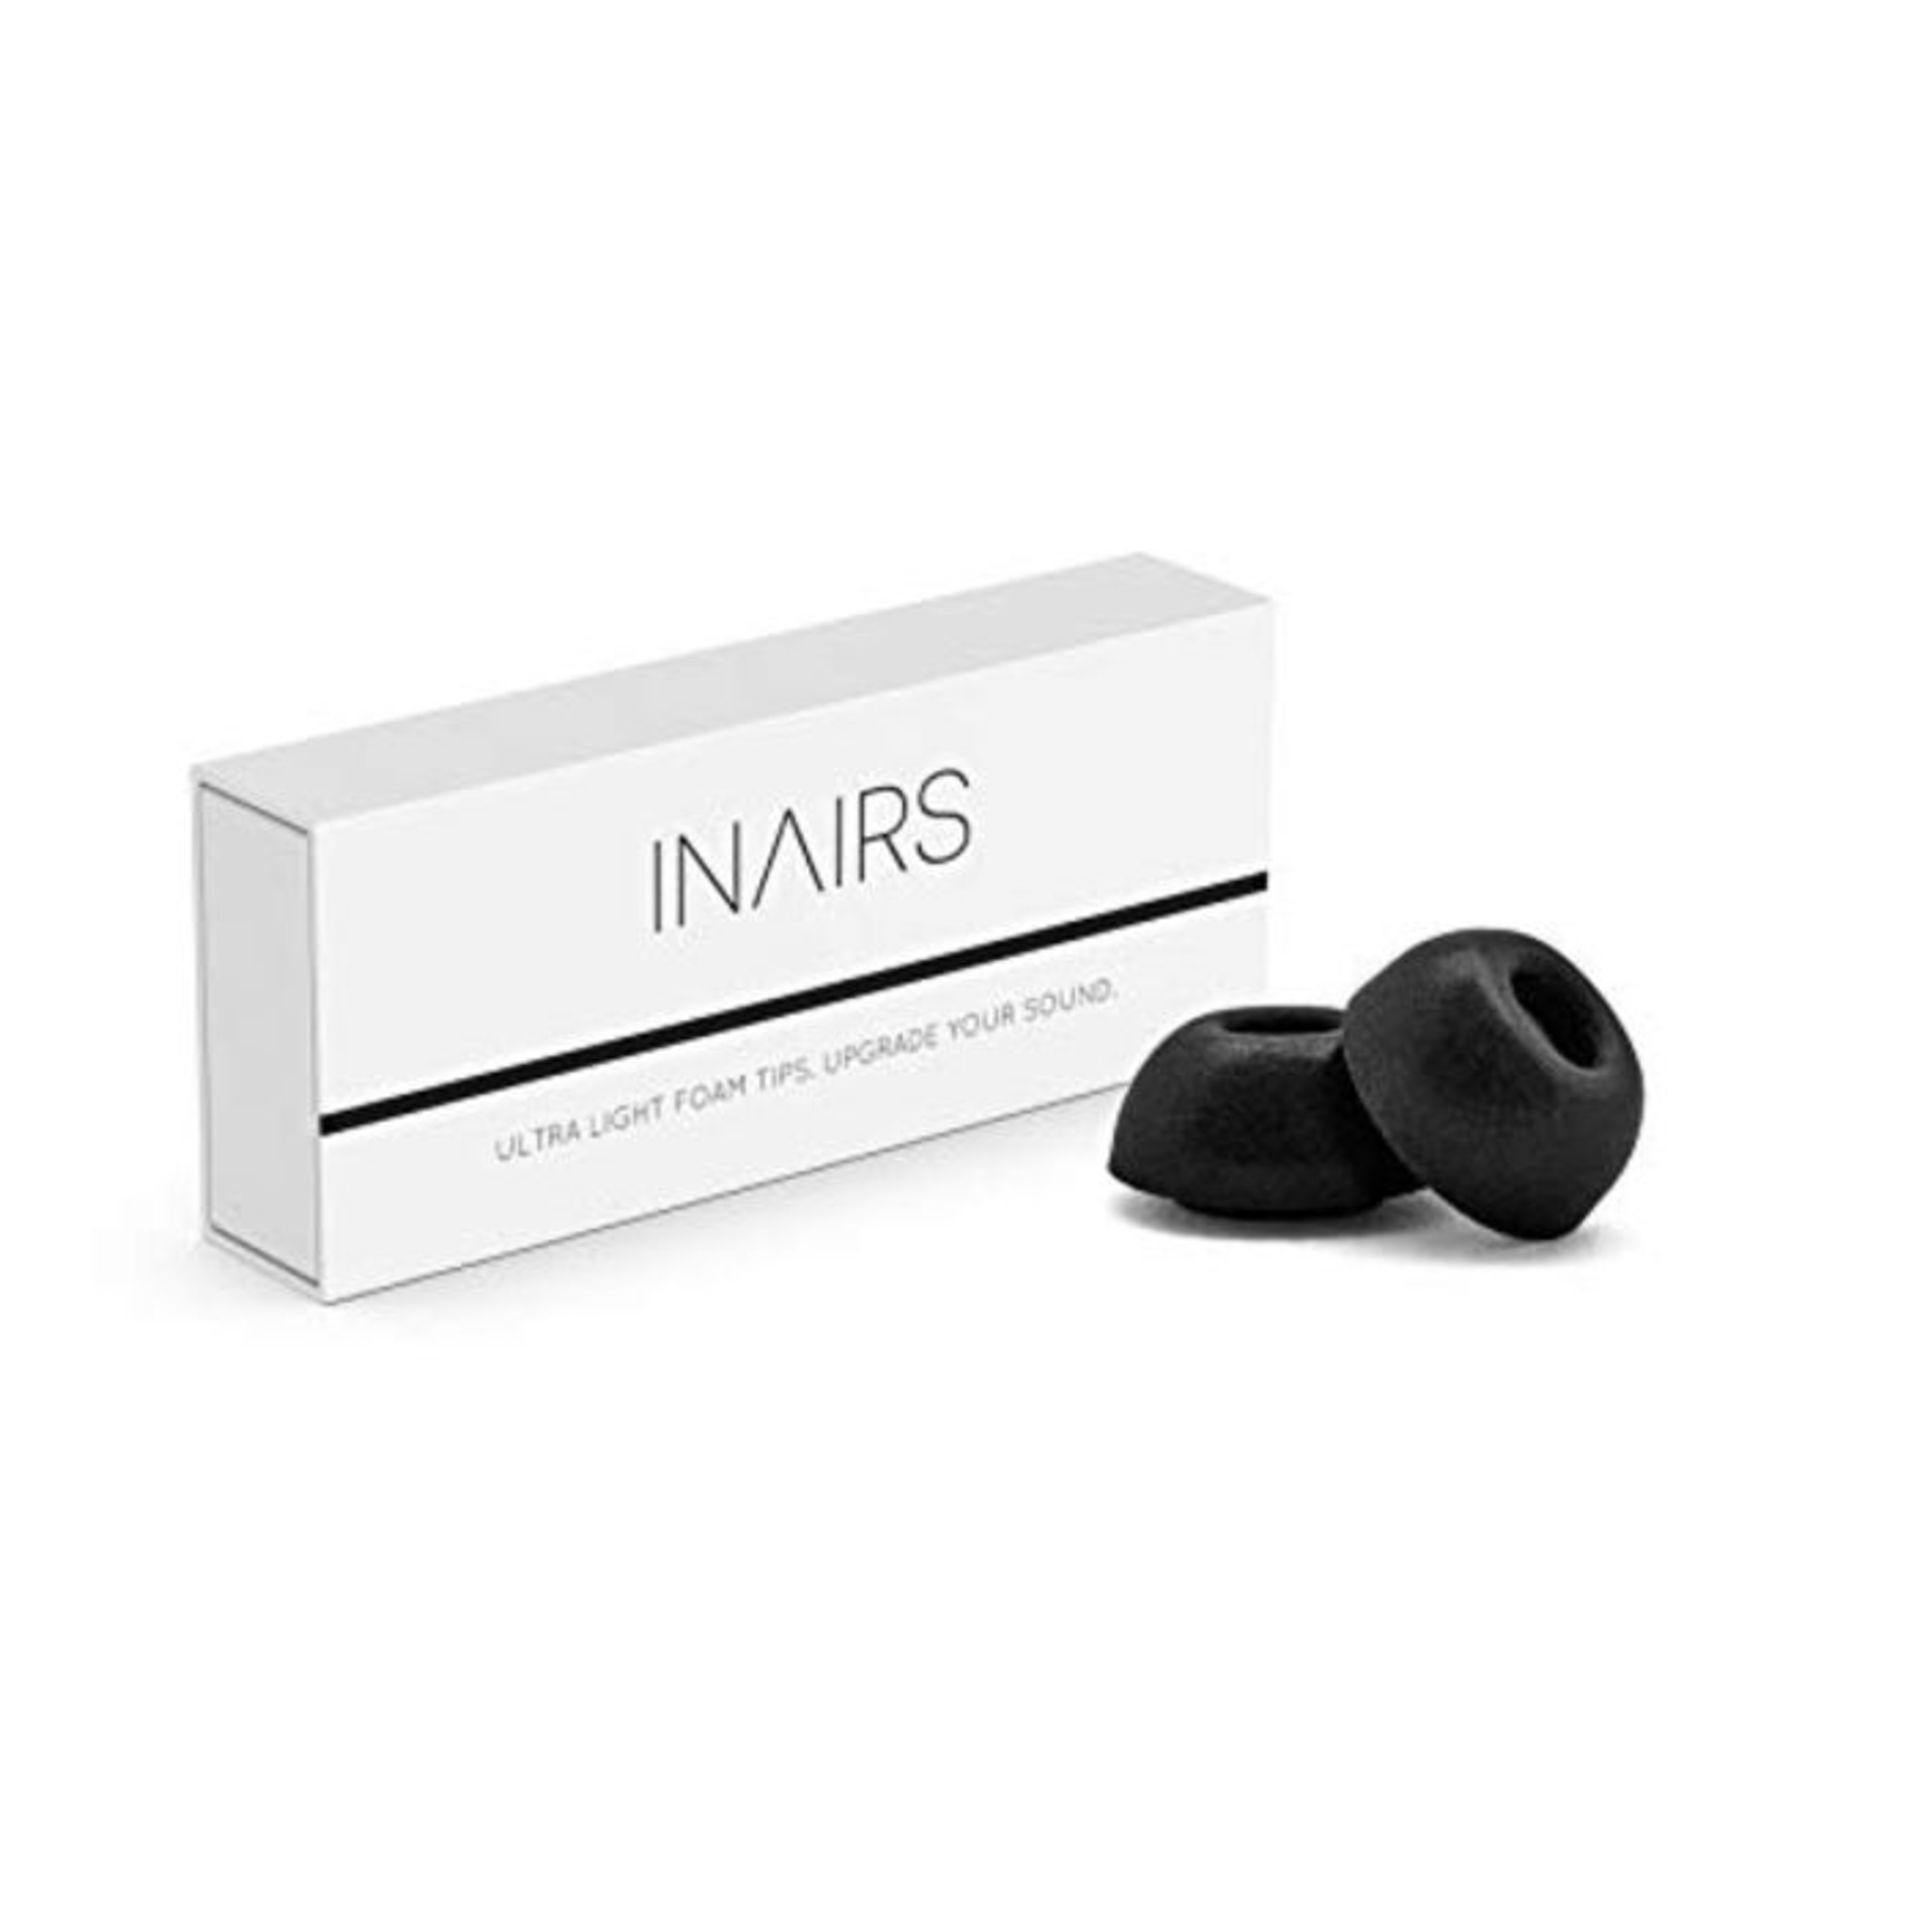 INAIRS Compatible with AirPods Pro (S/M/L) - 3 Pairs of Foam Tips - Upgrade your Earph